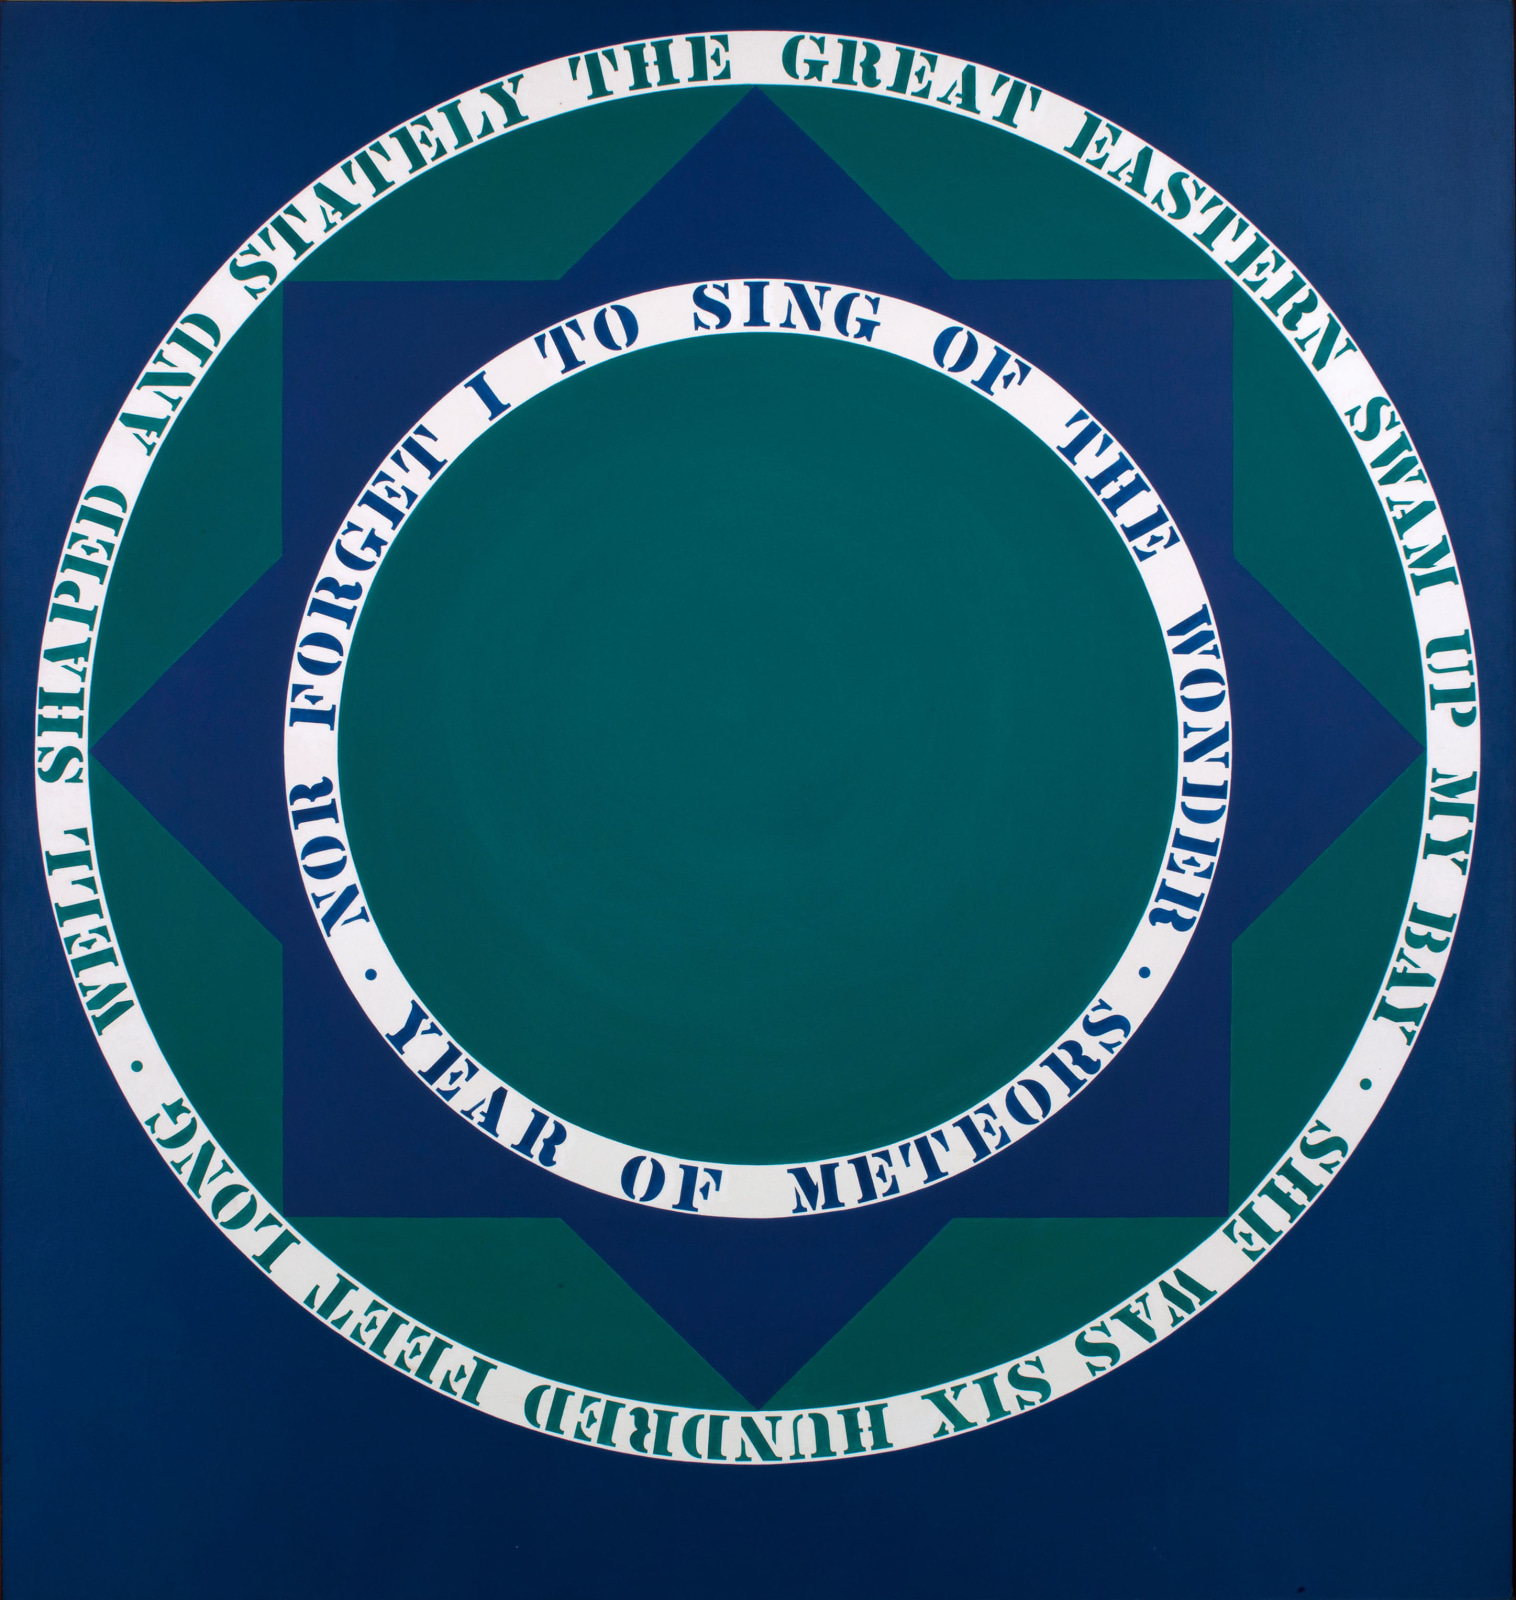 66th American Annual Exhibition: Directions in Contemporary Painting and Sculpture - Art Institute of Chicago - Exhibitions - Robert Indiana